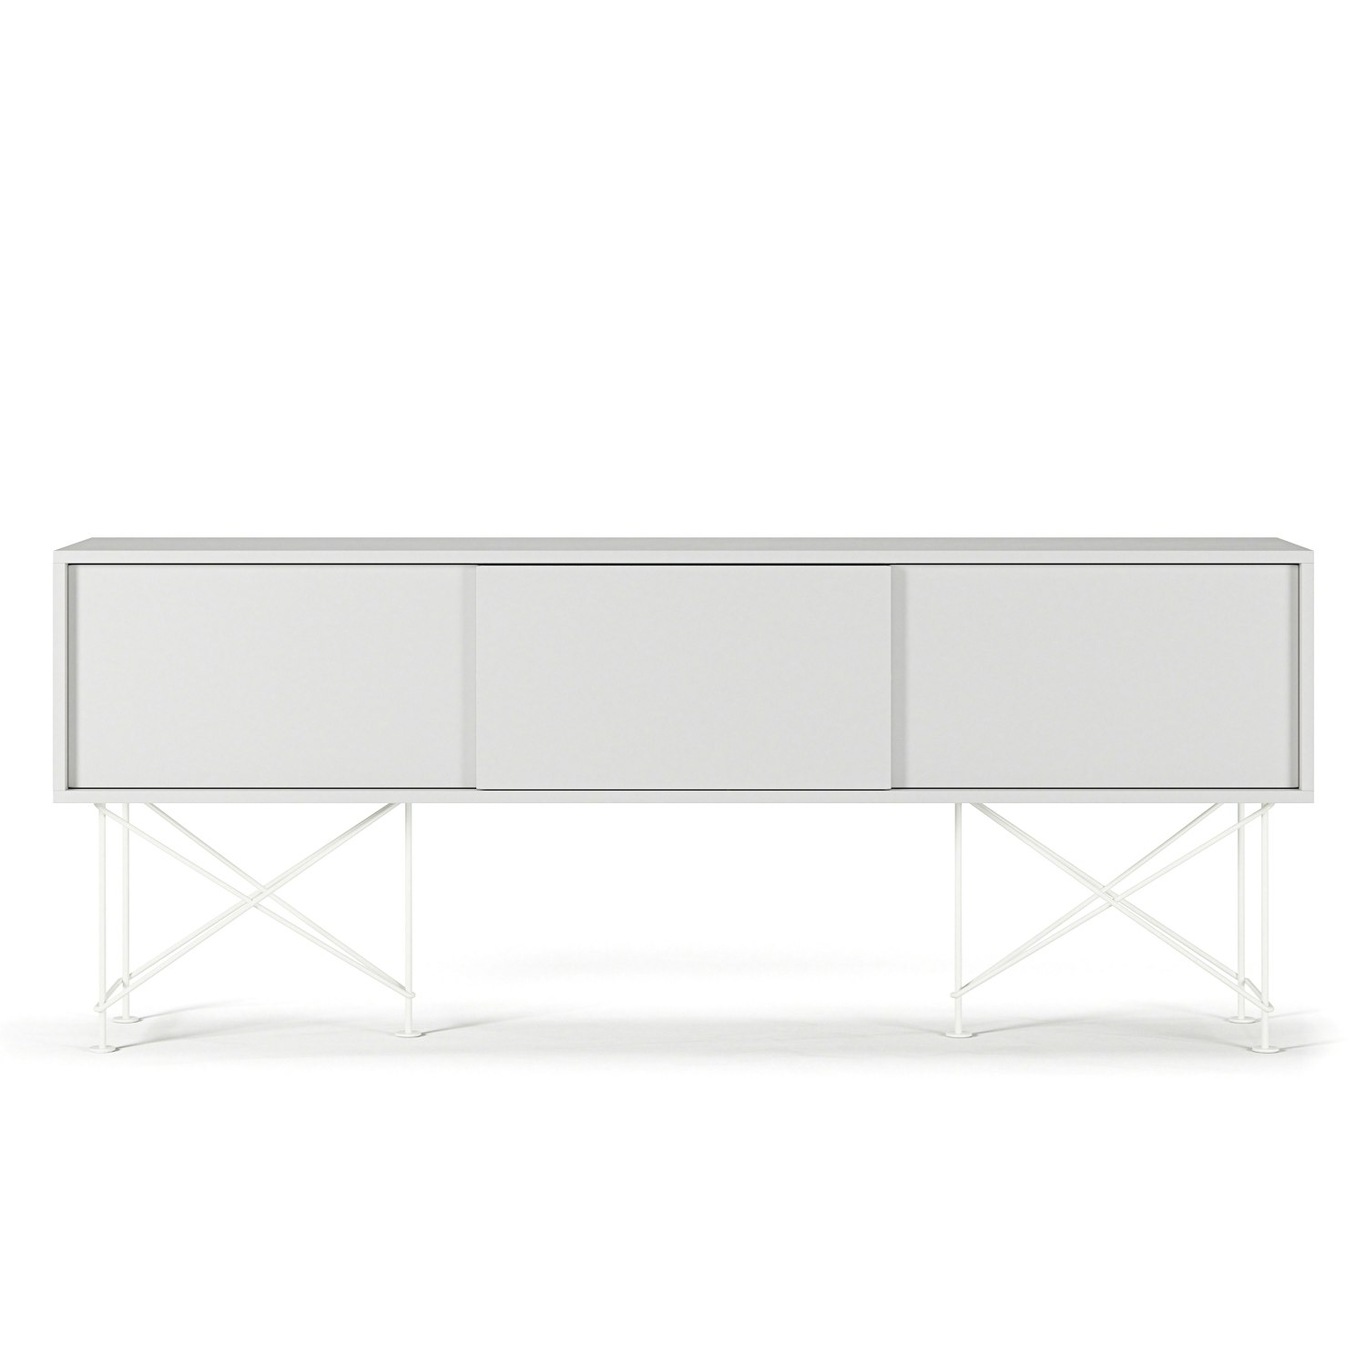 Vogue Media Bench With Stand 180 cm, White / White